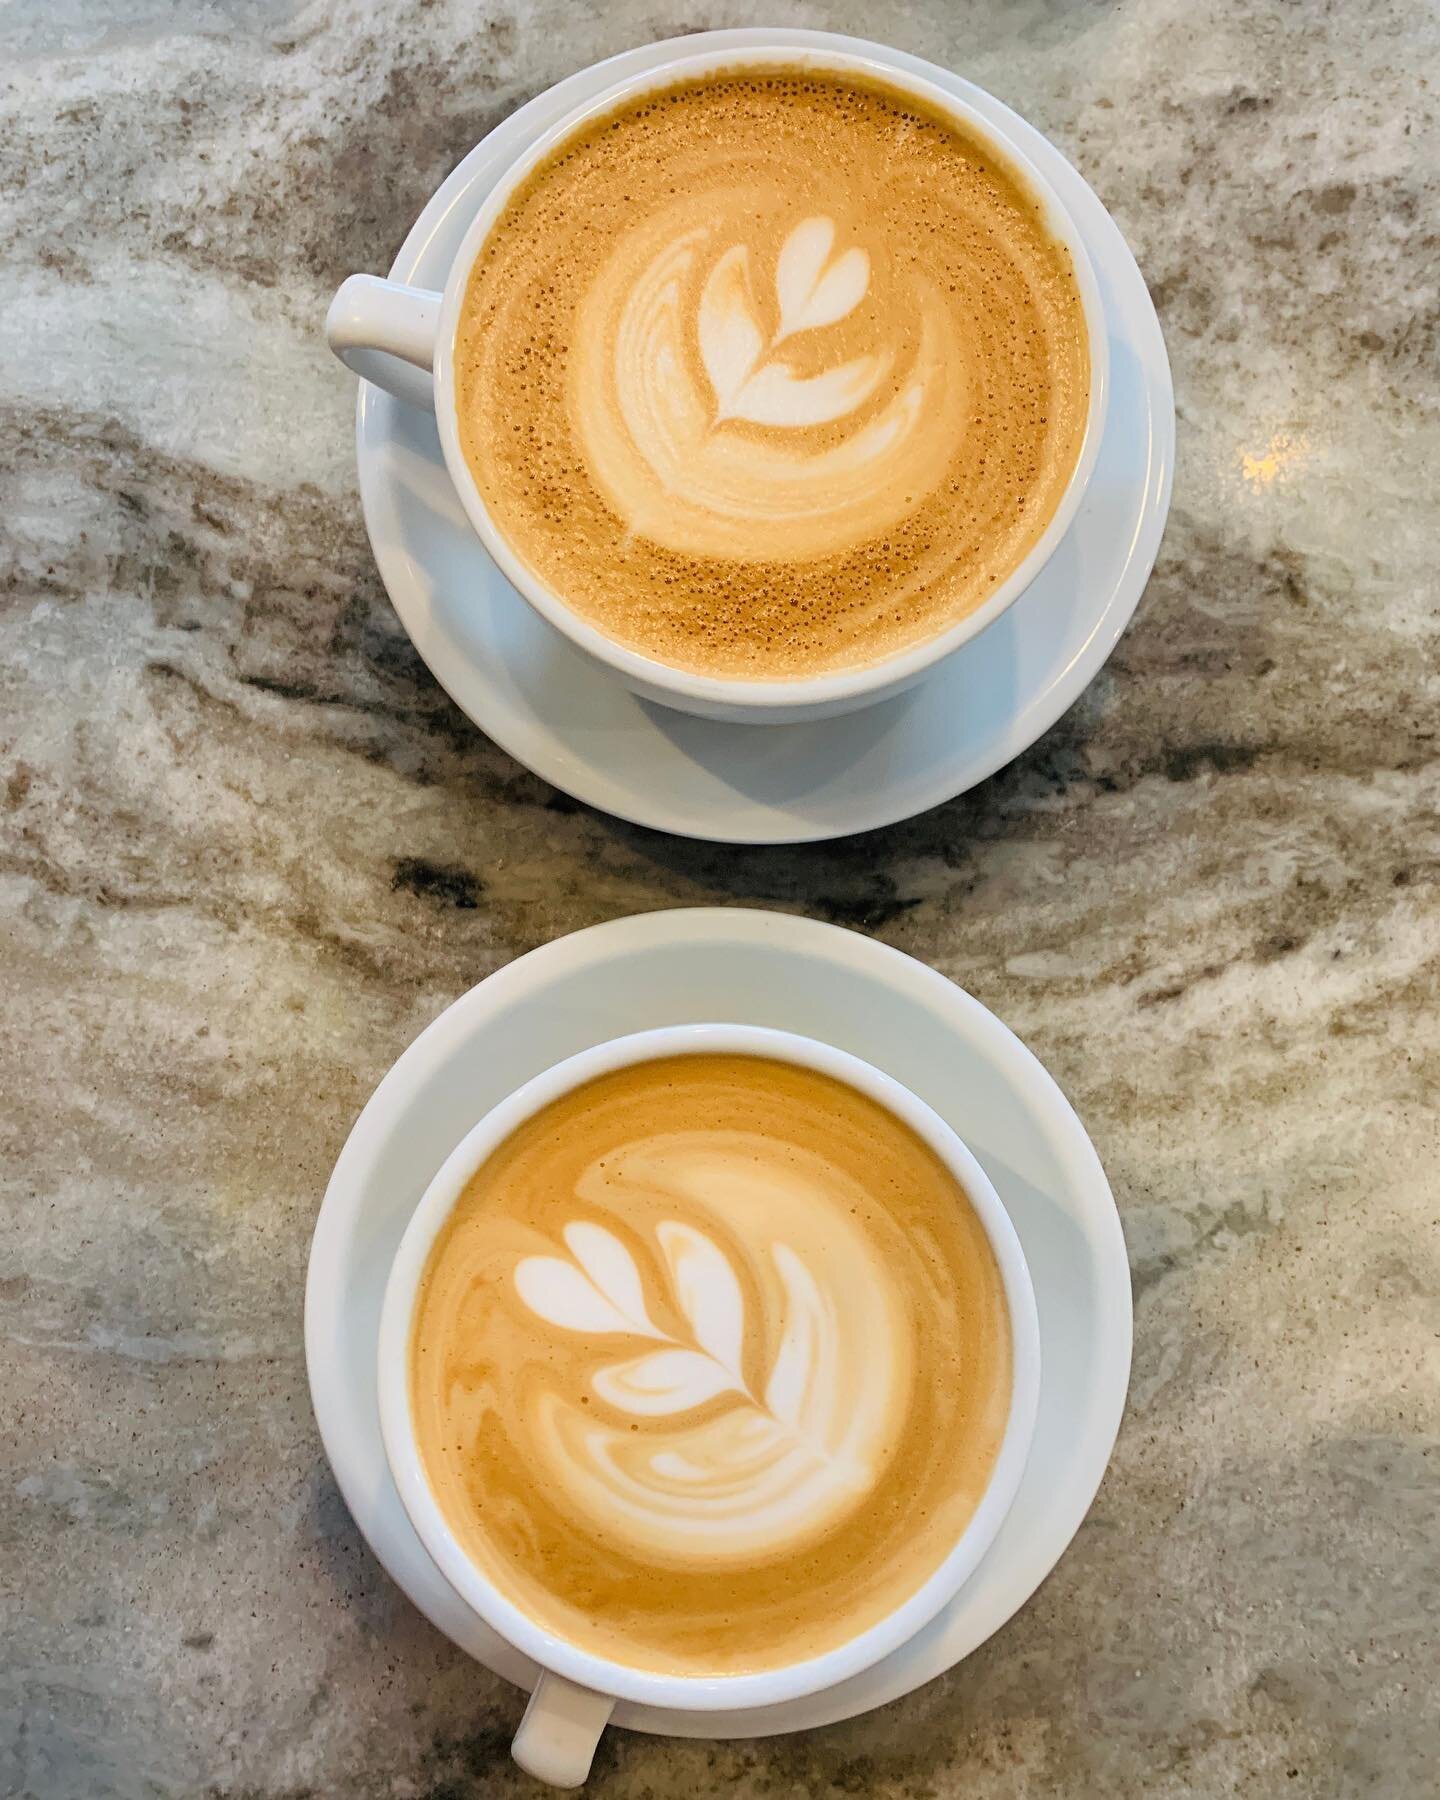 Let's be real here, latte art in ceramic cups is superior🤪⠀
⠀
⠀
⠀
⠀
⠀
#floatcoffeeshop #floatpasadena #cafelatte #lattecoffee #latteart #lattearttulip #baristablog #baristalife #baristadiary #baristagram #latteartgram #latteartist #coffeedaily #coff